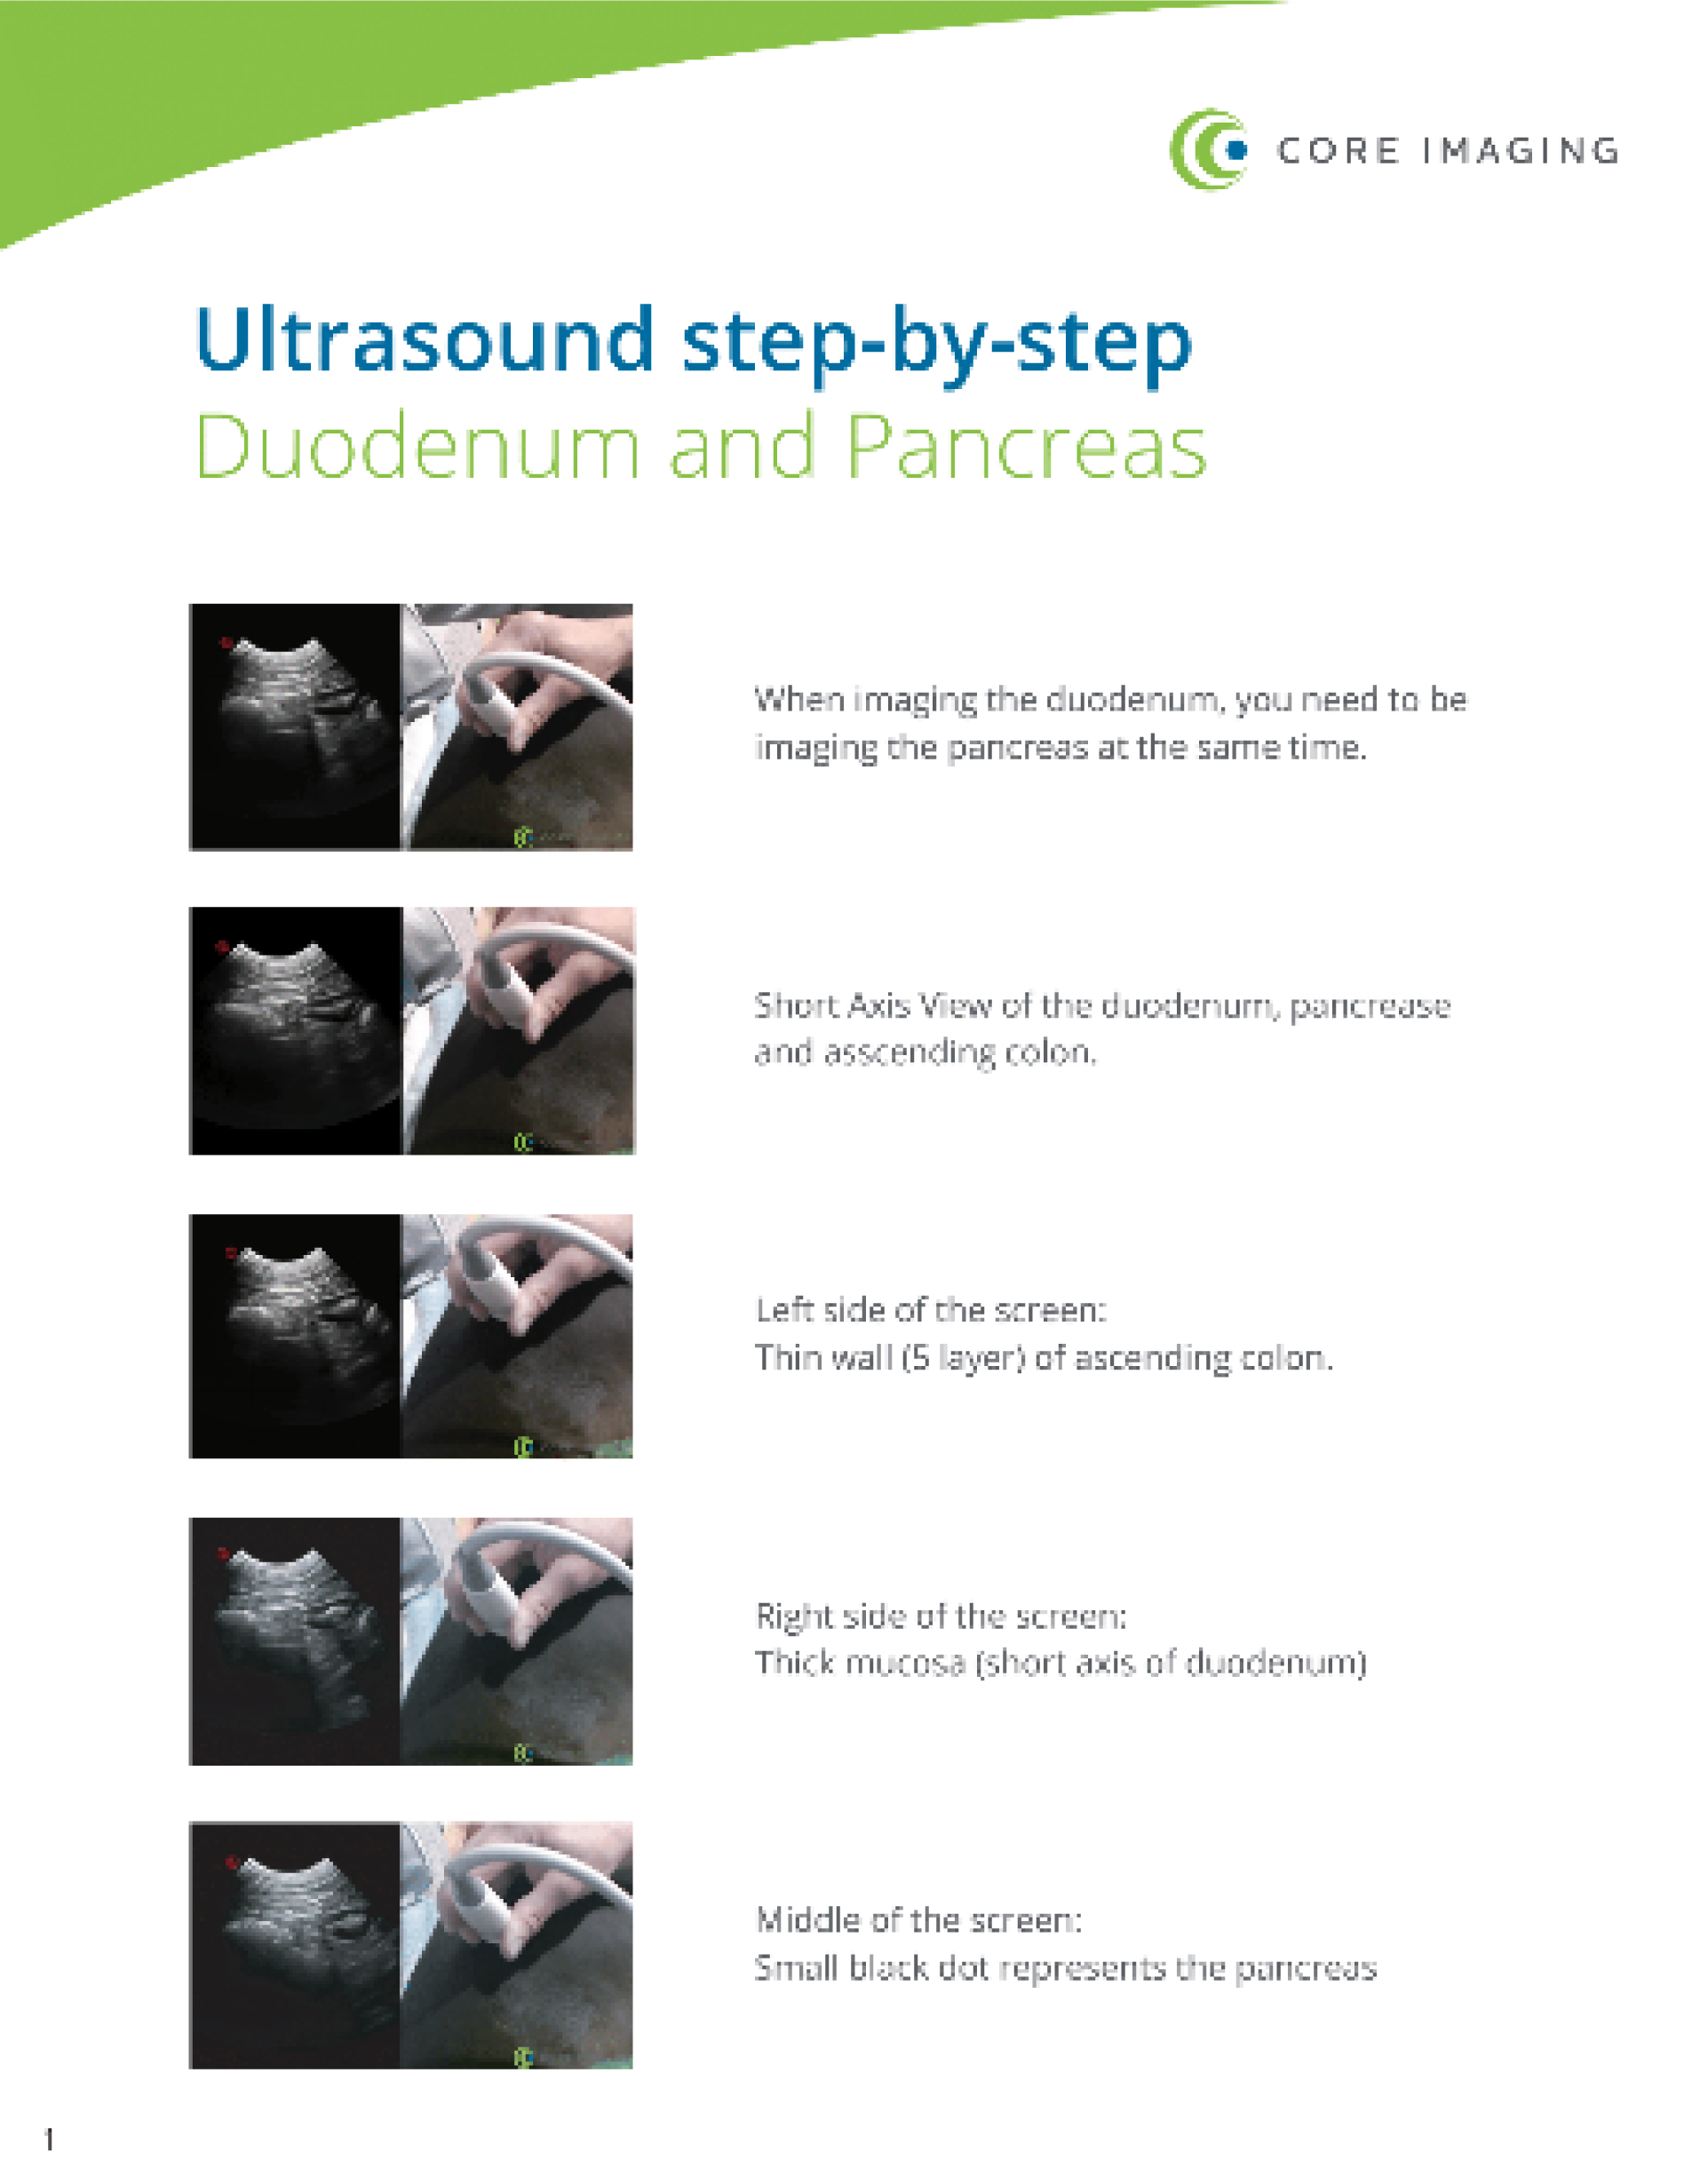 Step-by-Step Ultrasound Guide: Duodenum and Pancreas